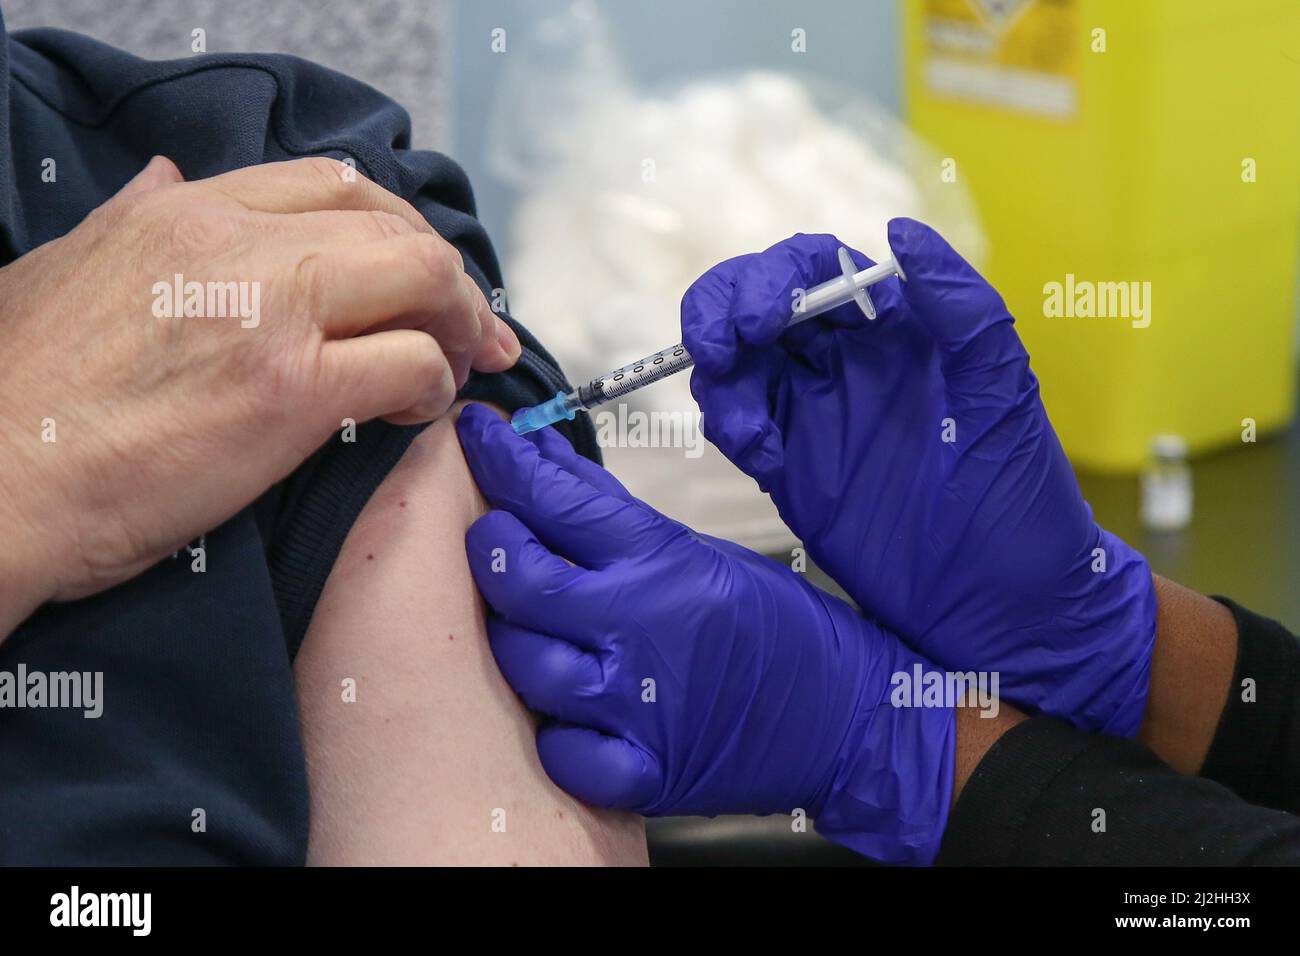 London, UK 1 Apr 2022 - A NHS vaccinator, administers the Pfizer COVID-19 second booster jab to a woman, at a vaccination centre in north London. Older adults have been invited for a fourth Covid-19 dose as part of the spring Covid-19 booster campaign. The campaign is being rolled out as immunity from vaccination declines over time, and according to the Office for National Statistics a record 4.9million people in the UK had COVID-19 in week to 26 March. Credit Dinendra Haria /Alamy Live News Stock Photo